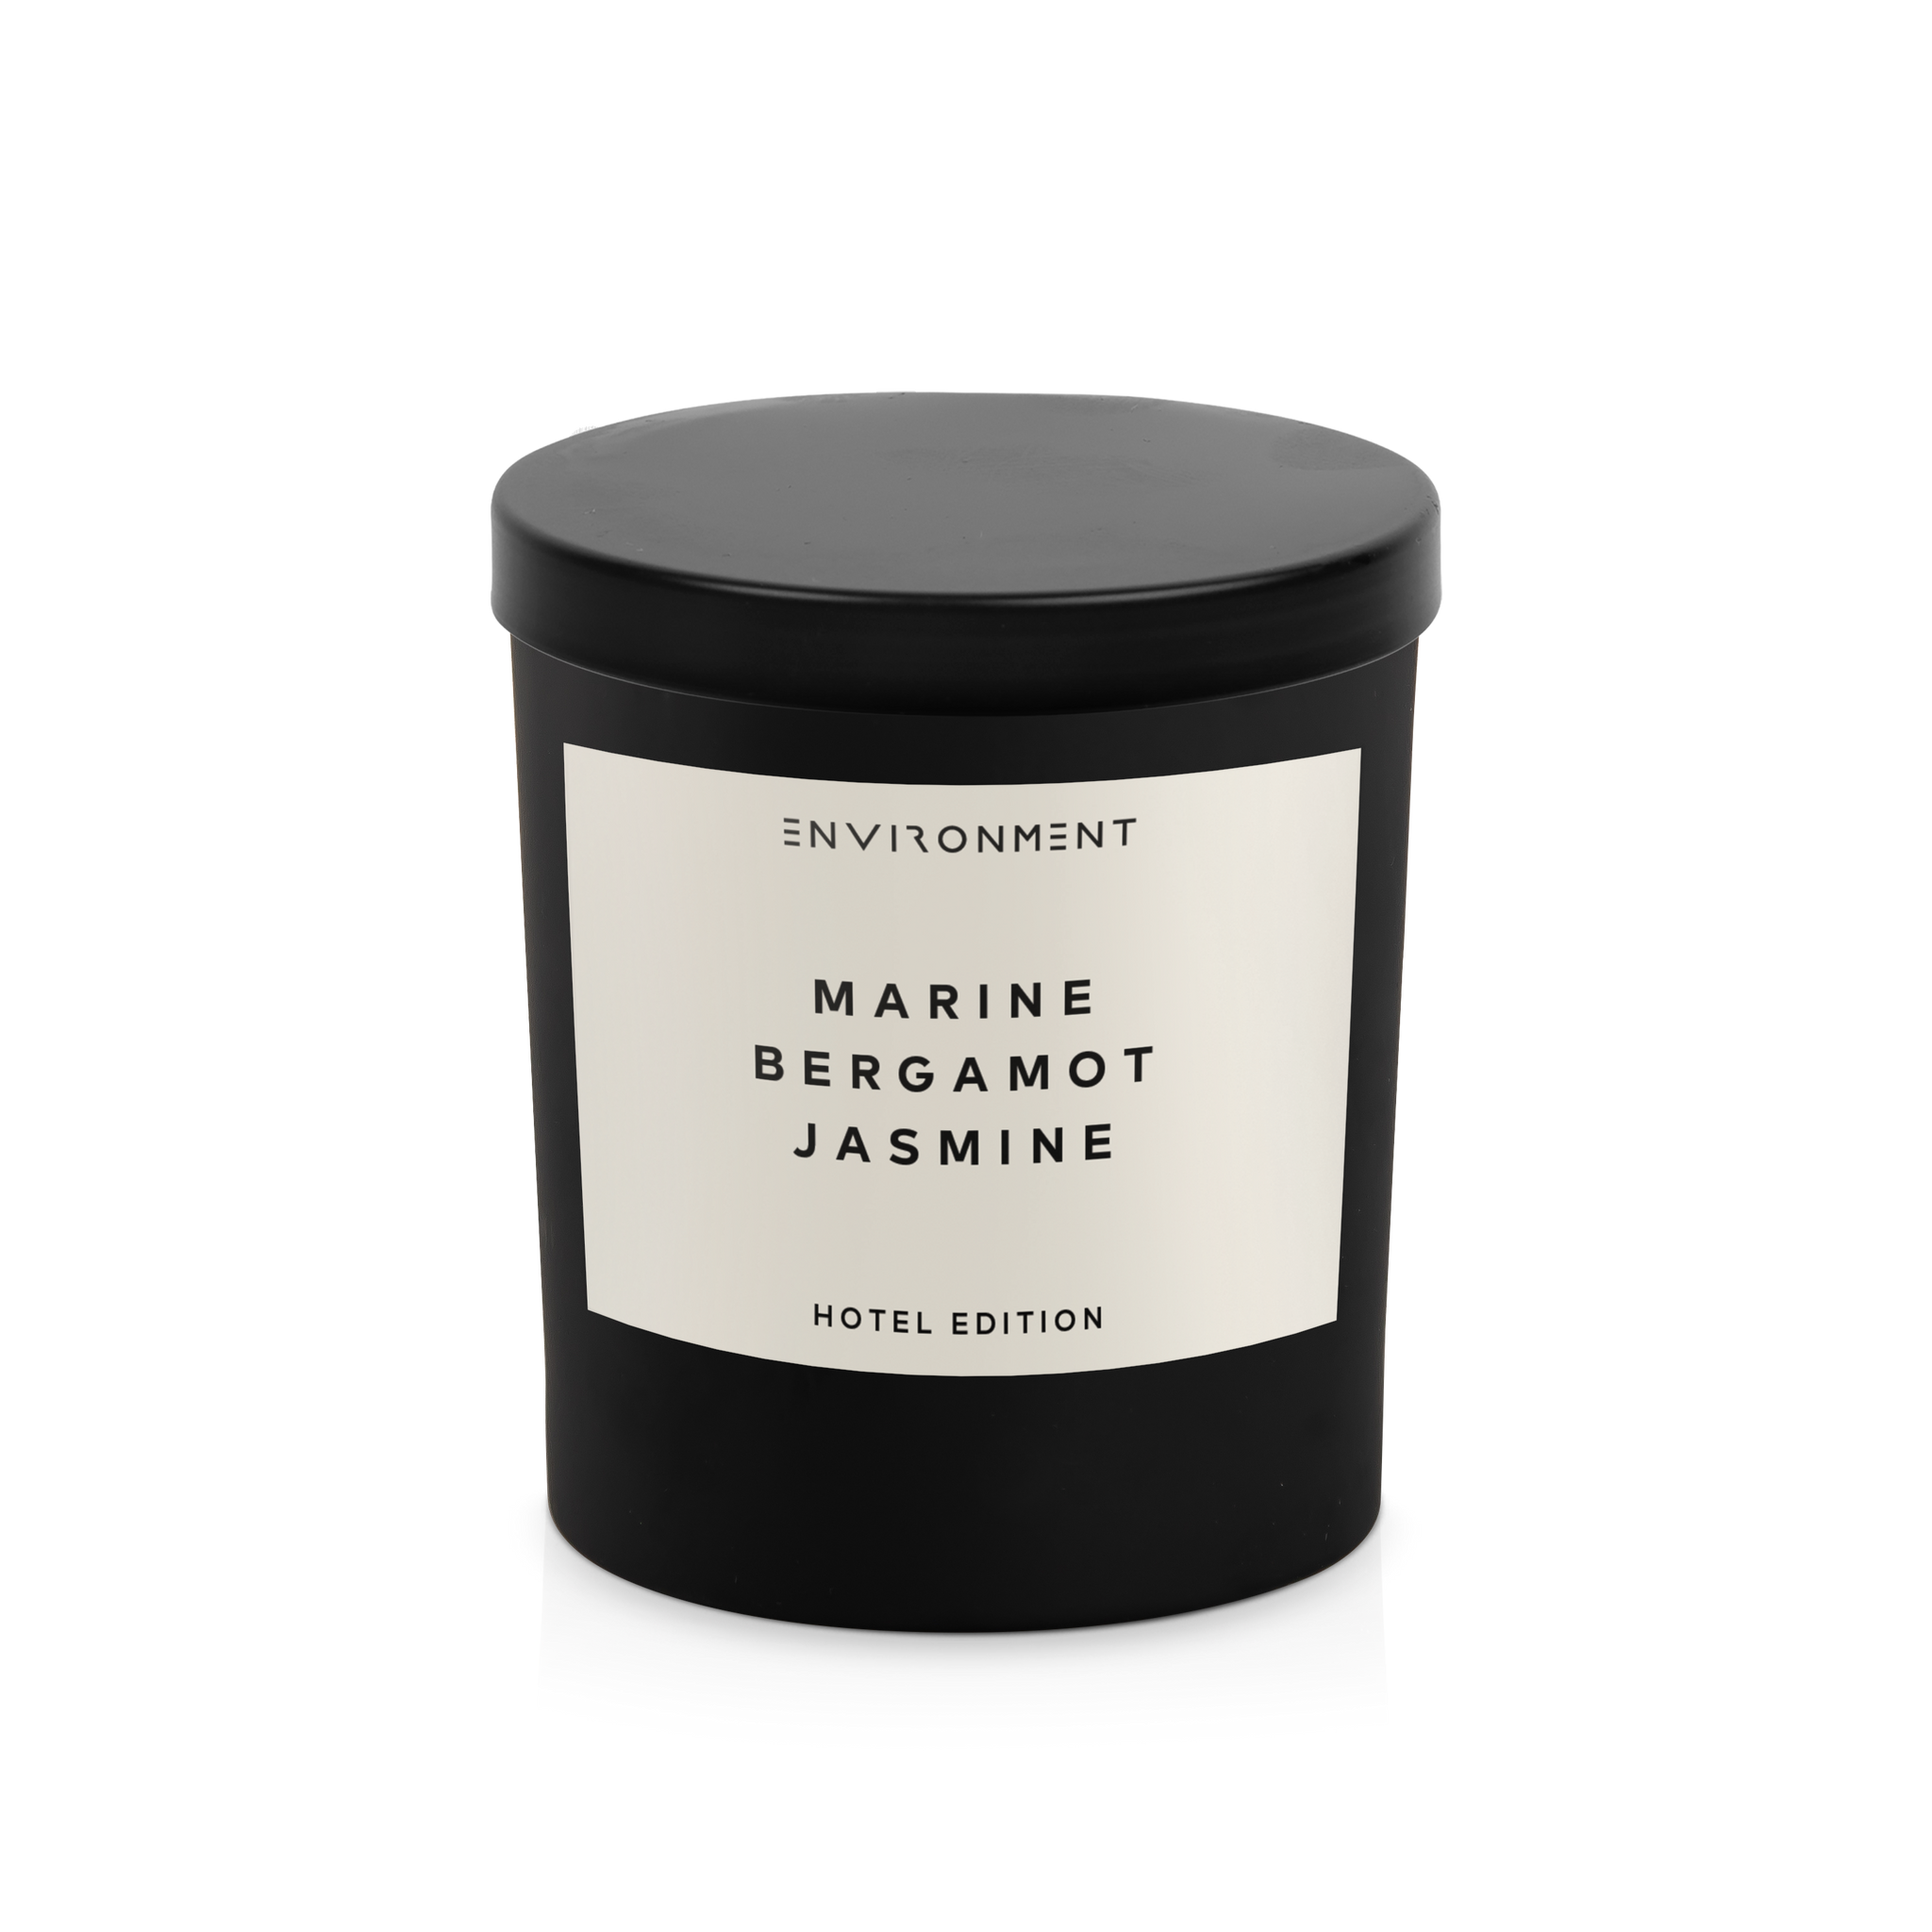 8oz Marine | Bergamot | Jasmine Candle with Lid and Box (Inspired by The Ritz Carlton Hotel®)